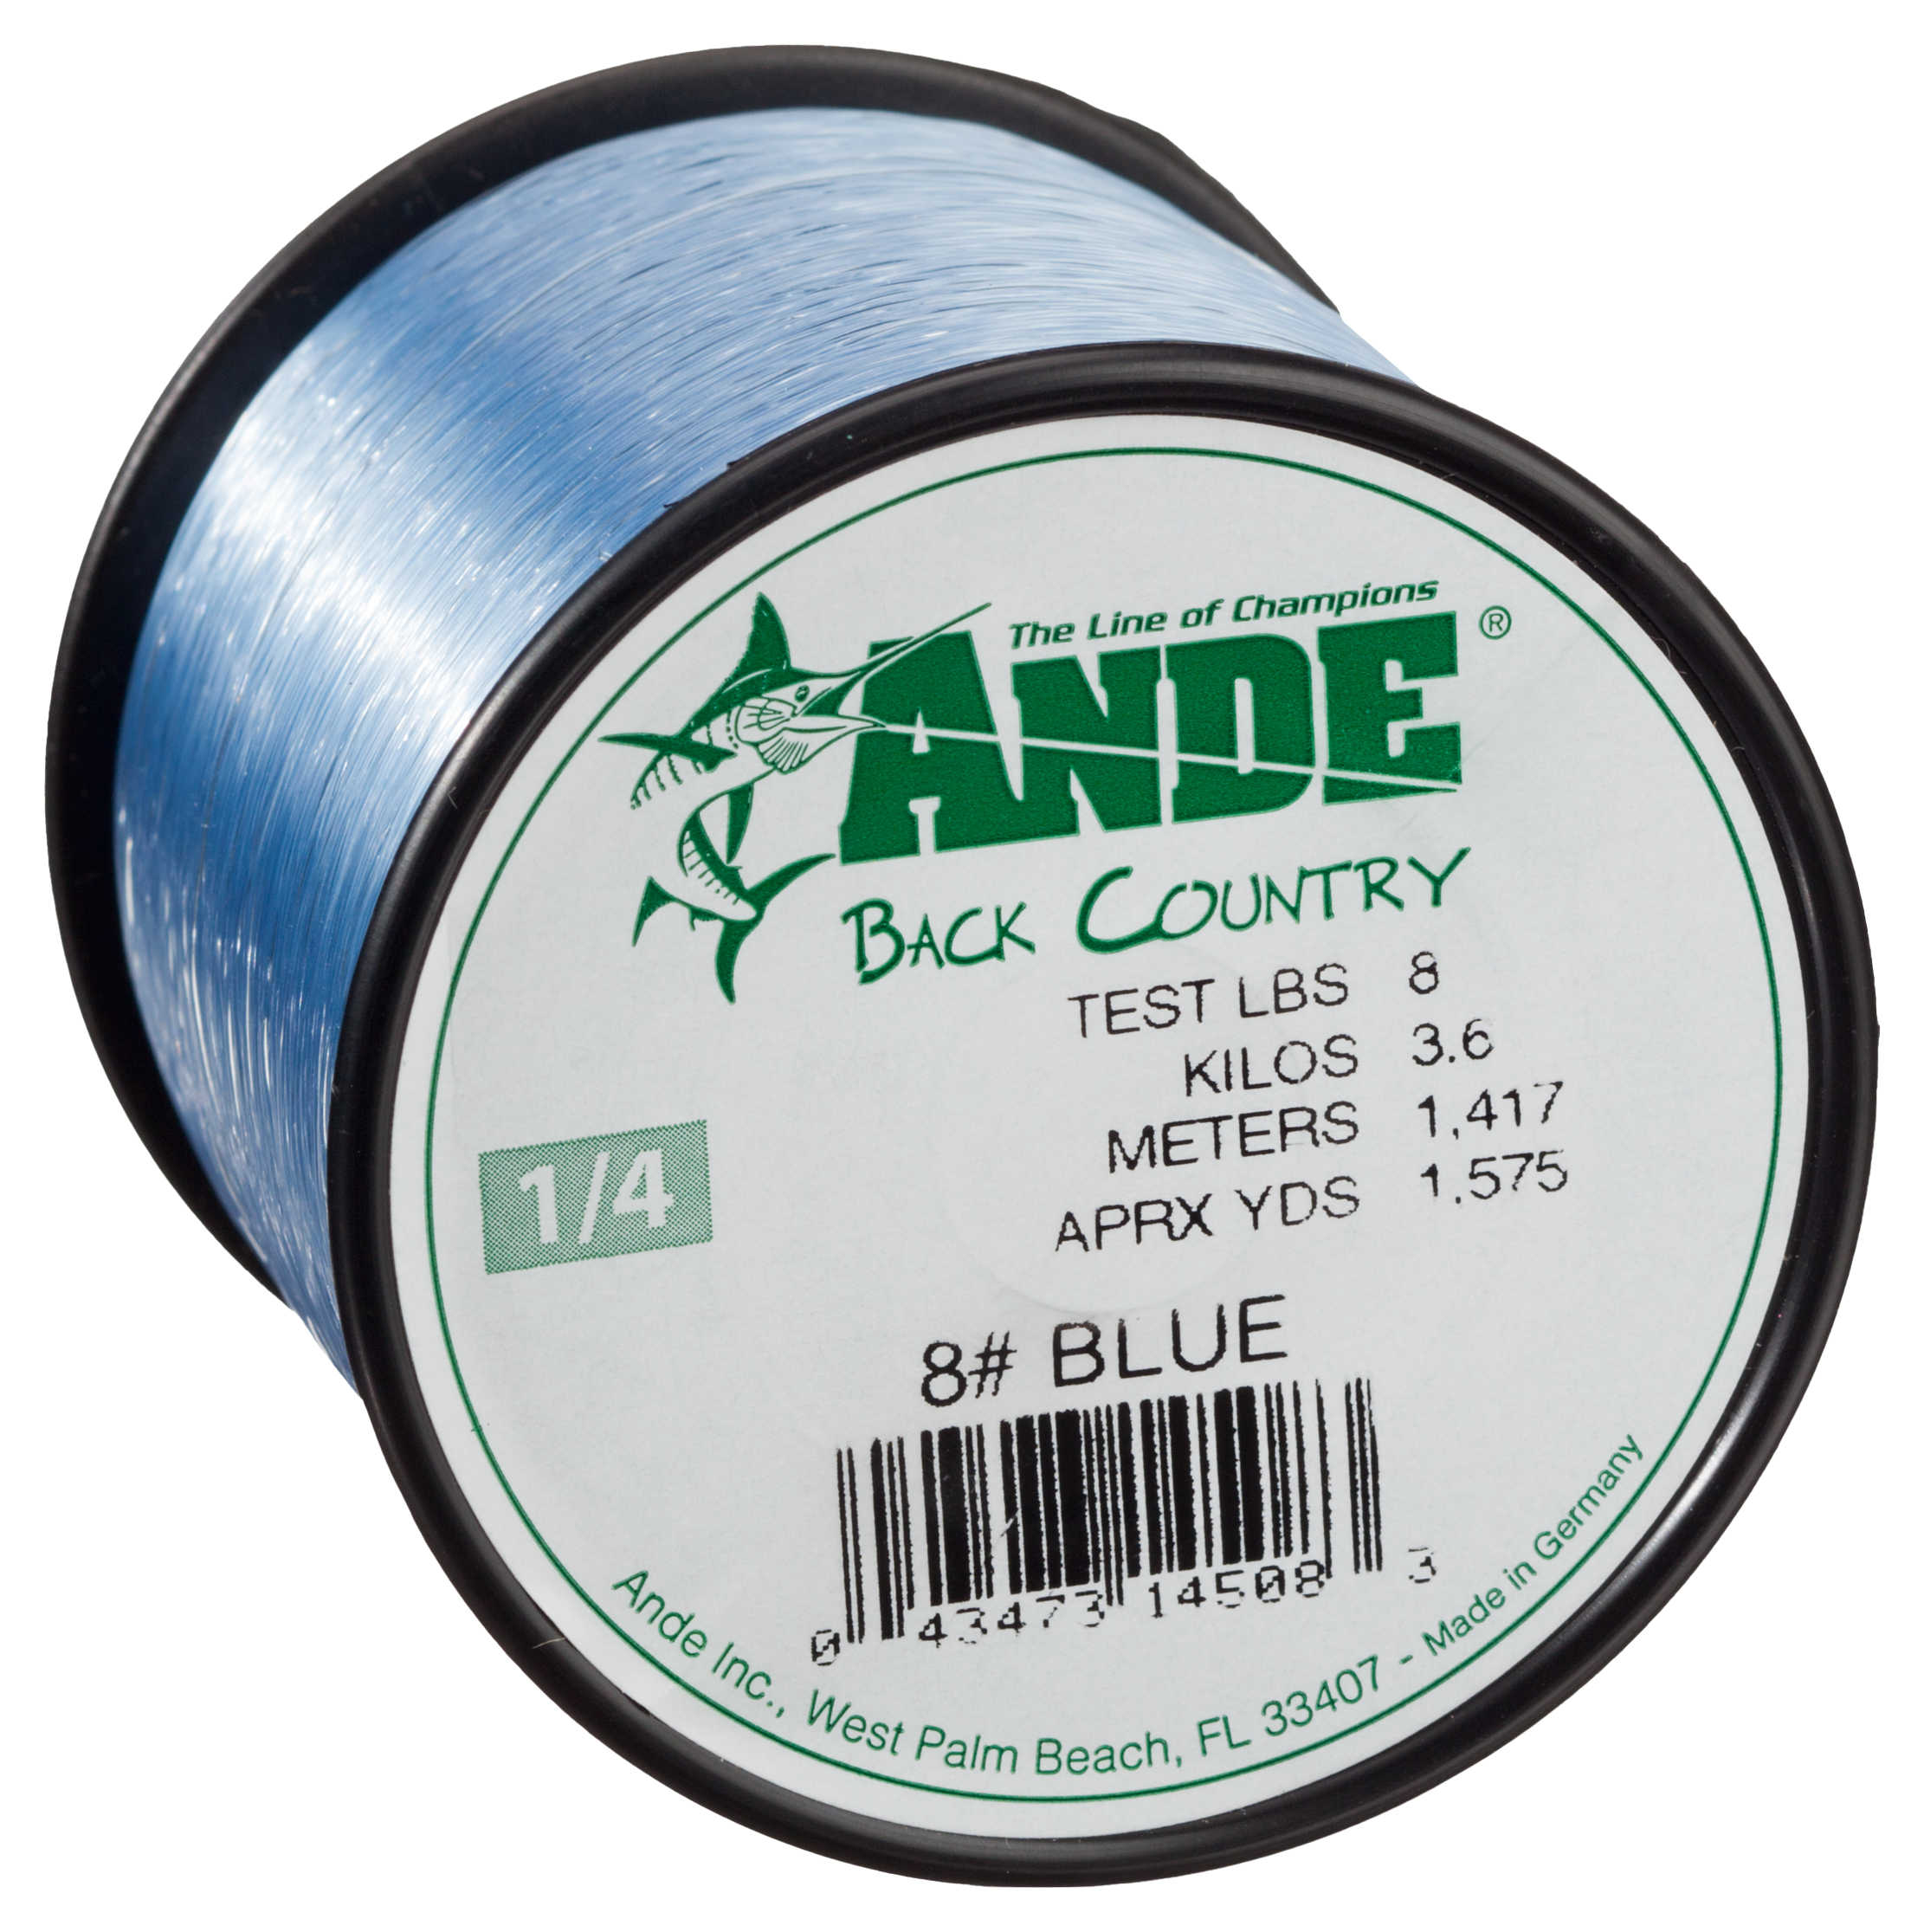 Ande Monofilament Line (Clear, 12 -Pounds Test, 1/4# Spool)